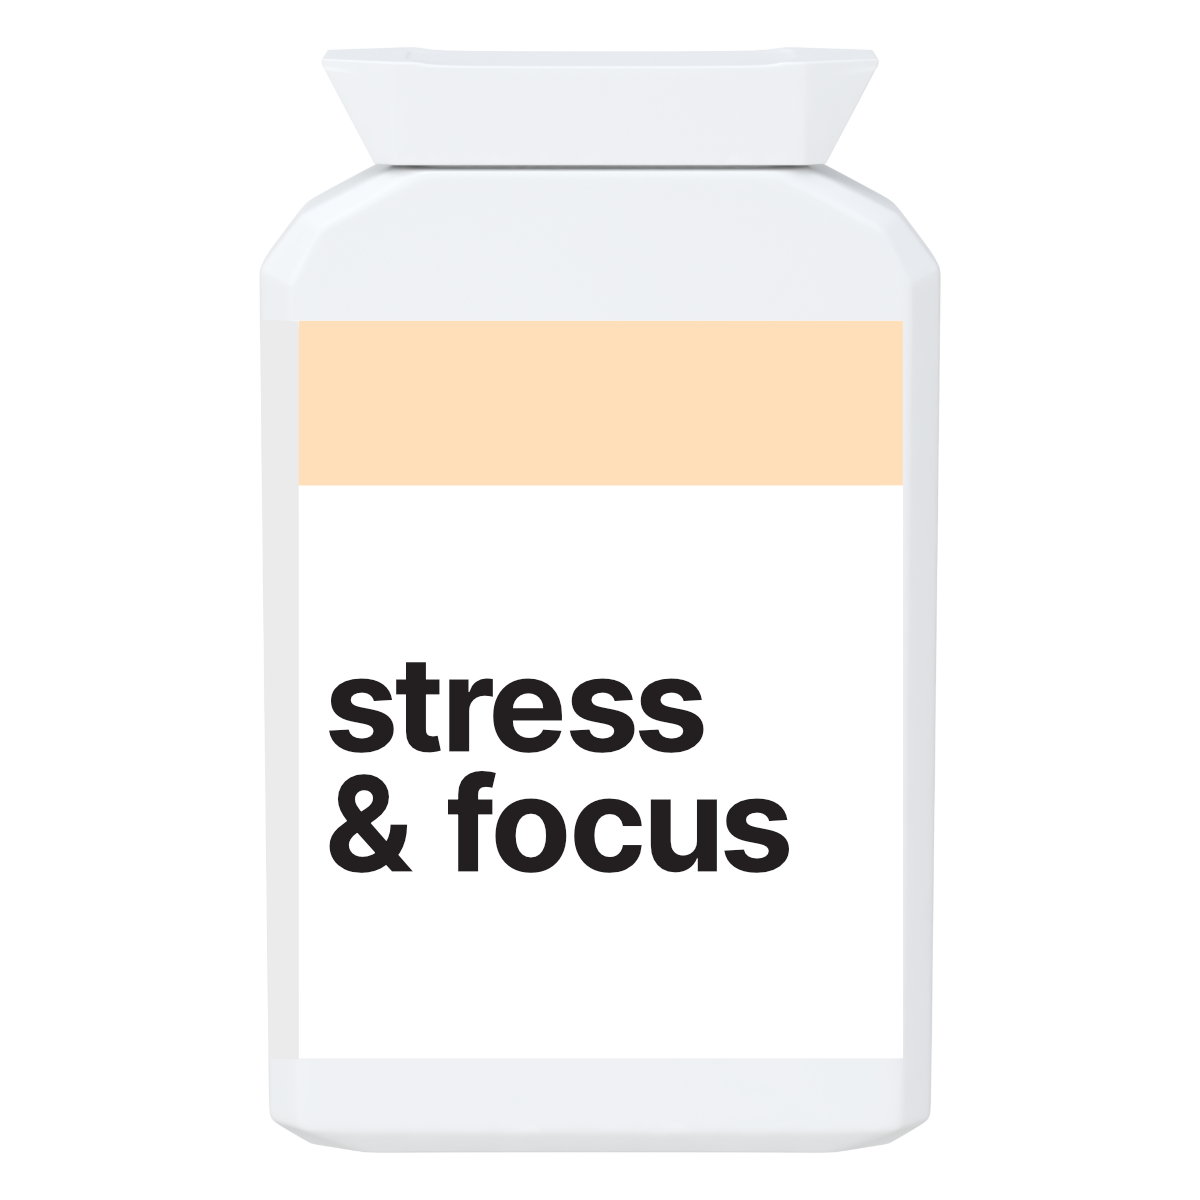 Products to help with Stress